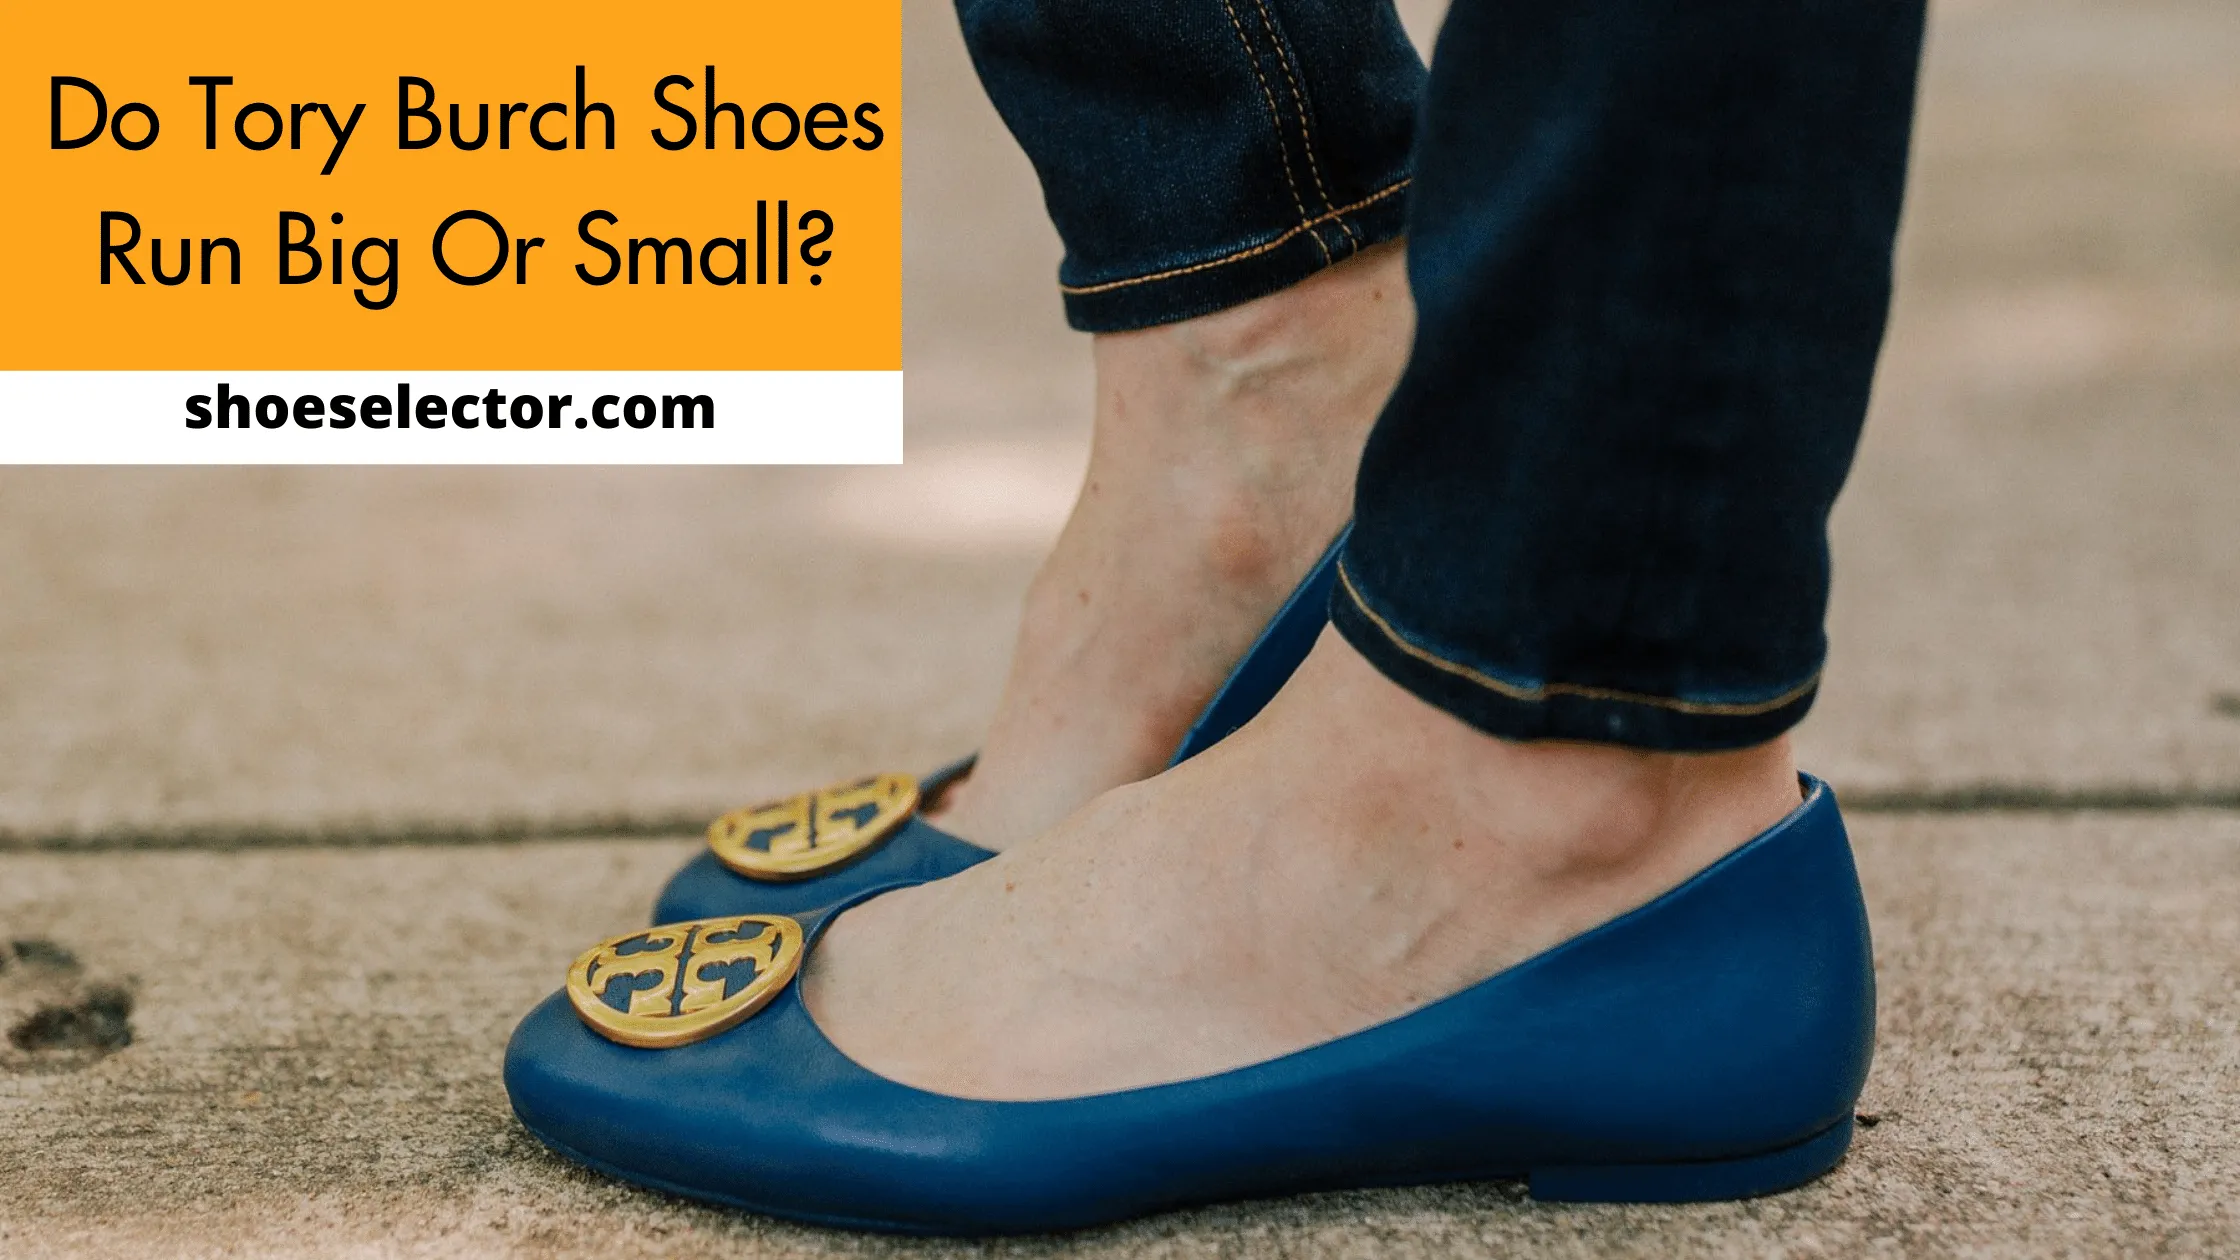 Do Tory Burch Shoes Run Small or Big, True to Size Chart?